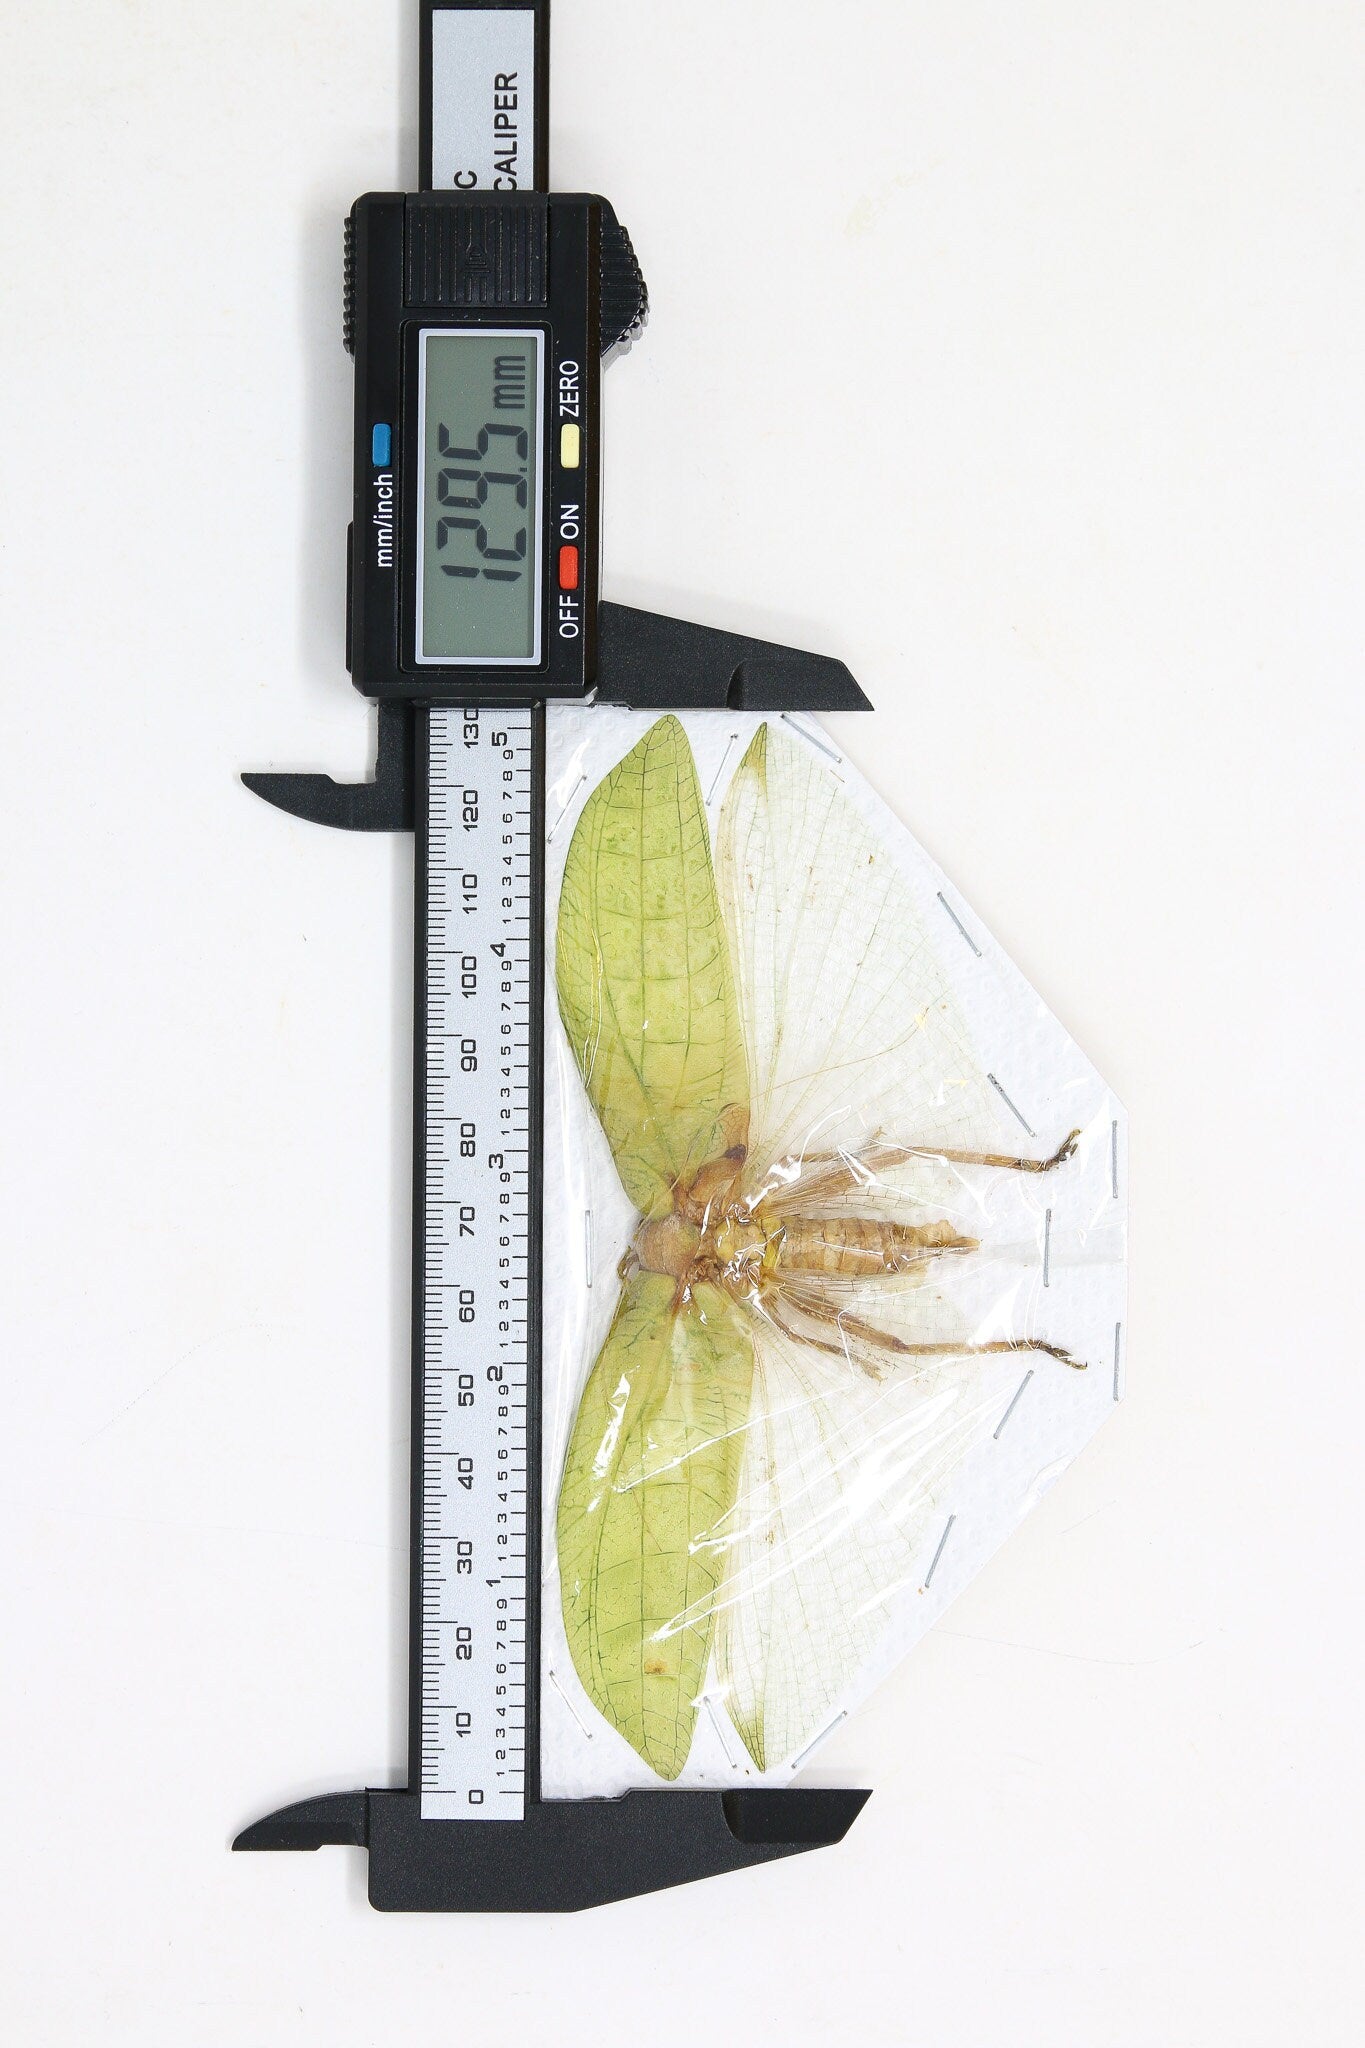 Katydid Insect Collection (Thailand) A1 Spread Specimen, Long-horned Grasshopper, Bush Cricket, Lot#24